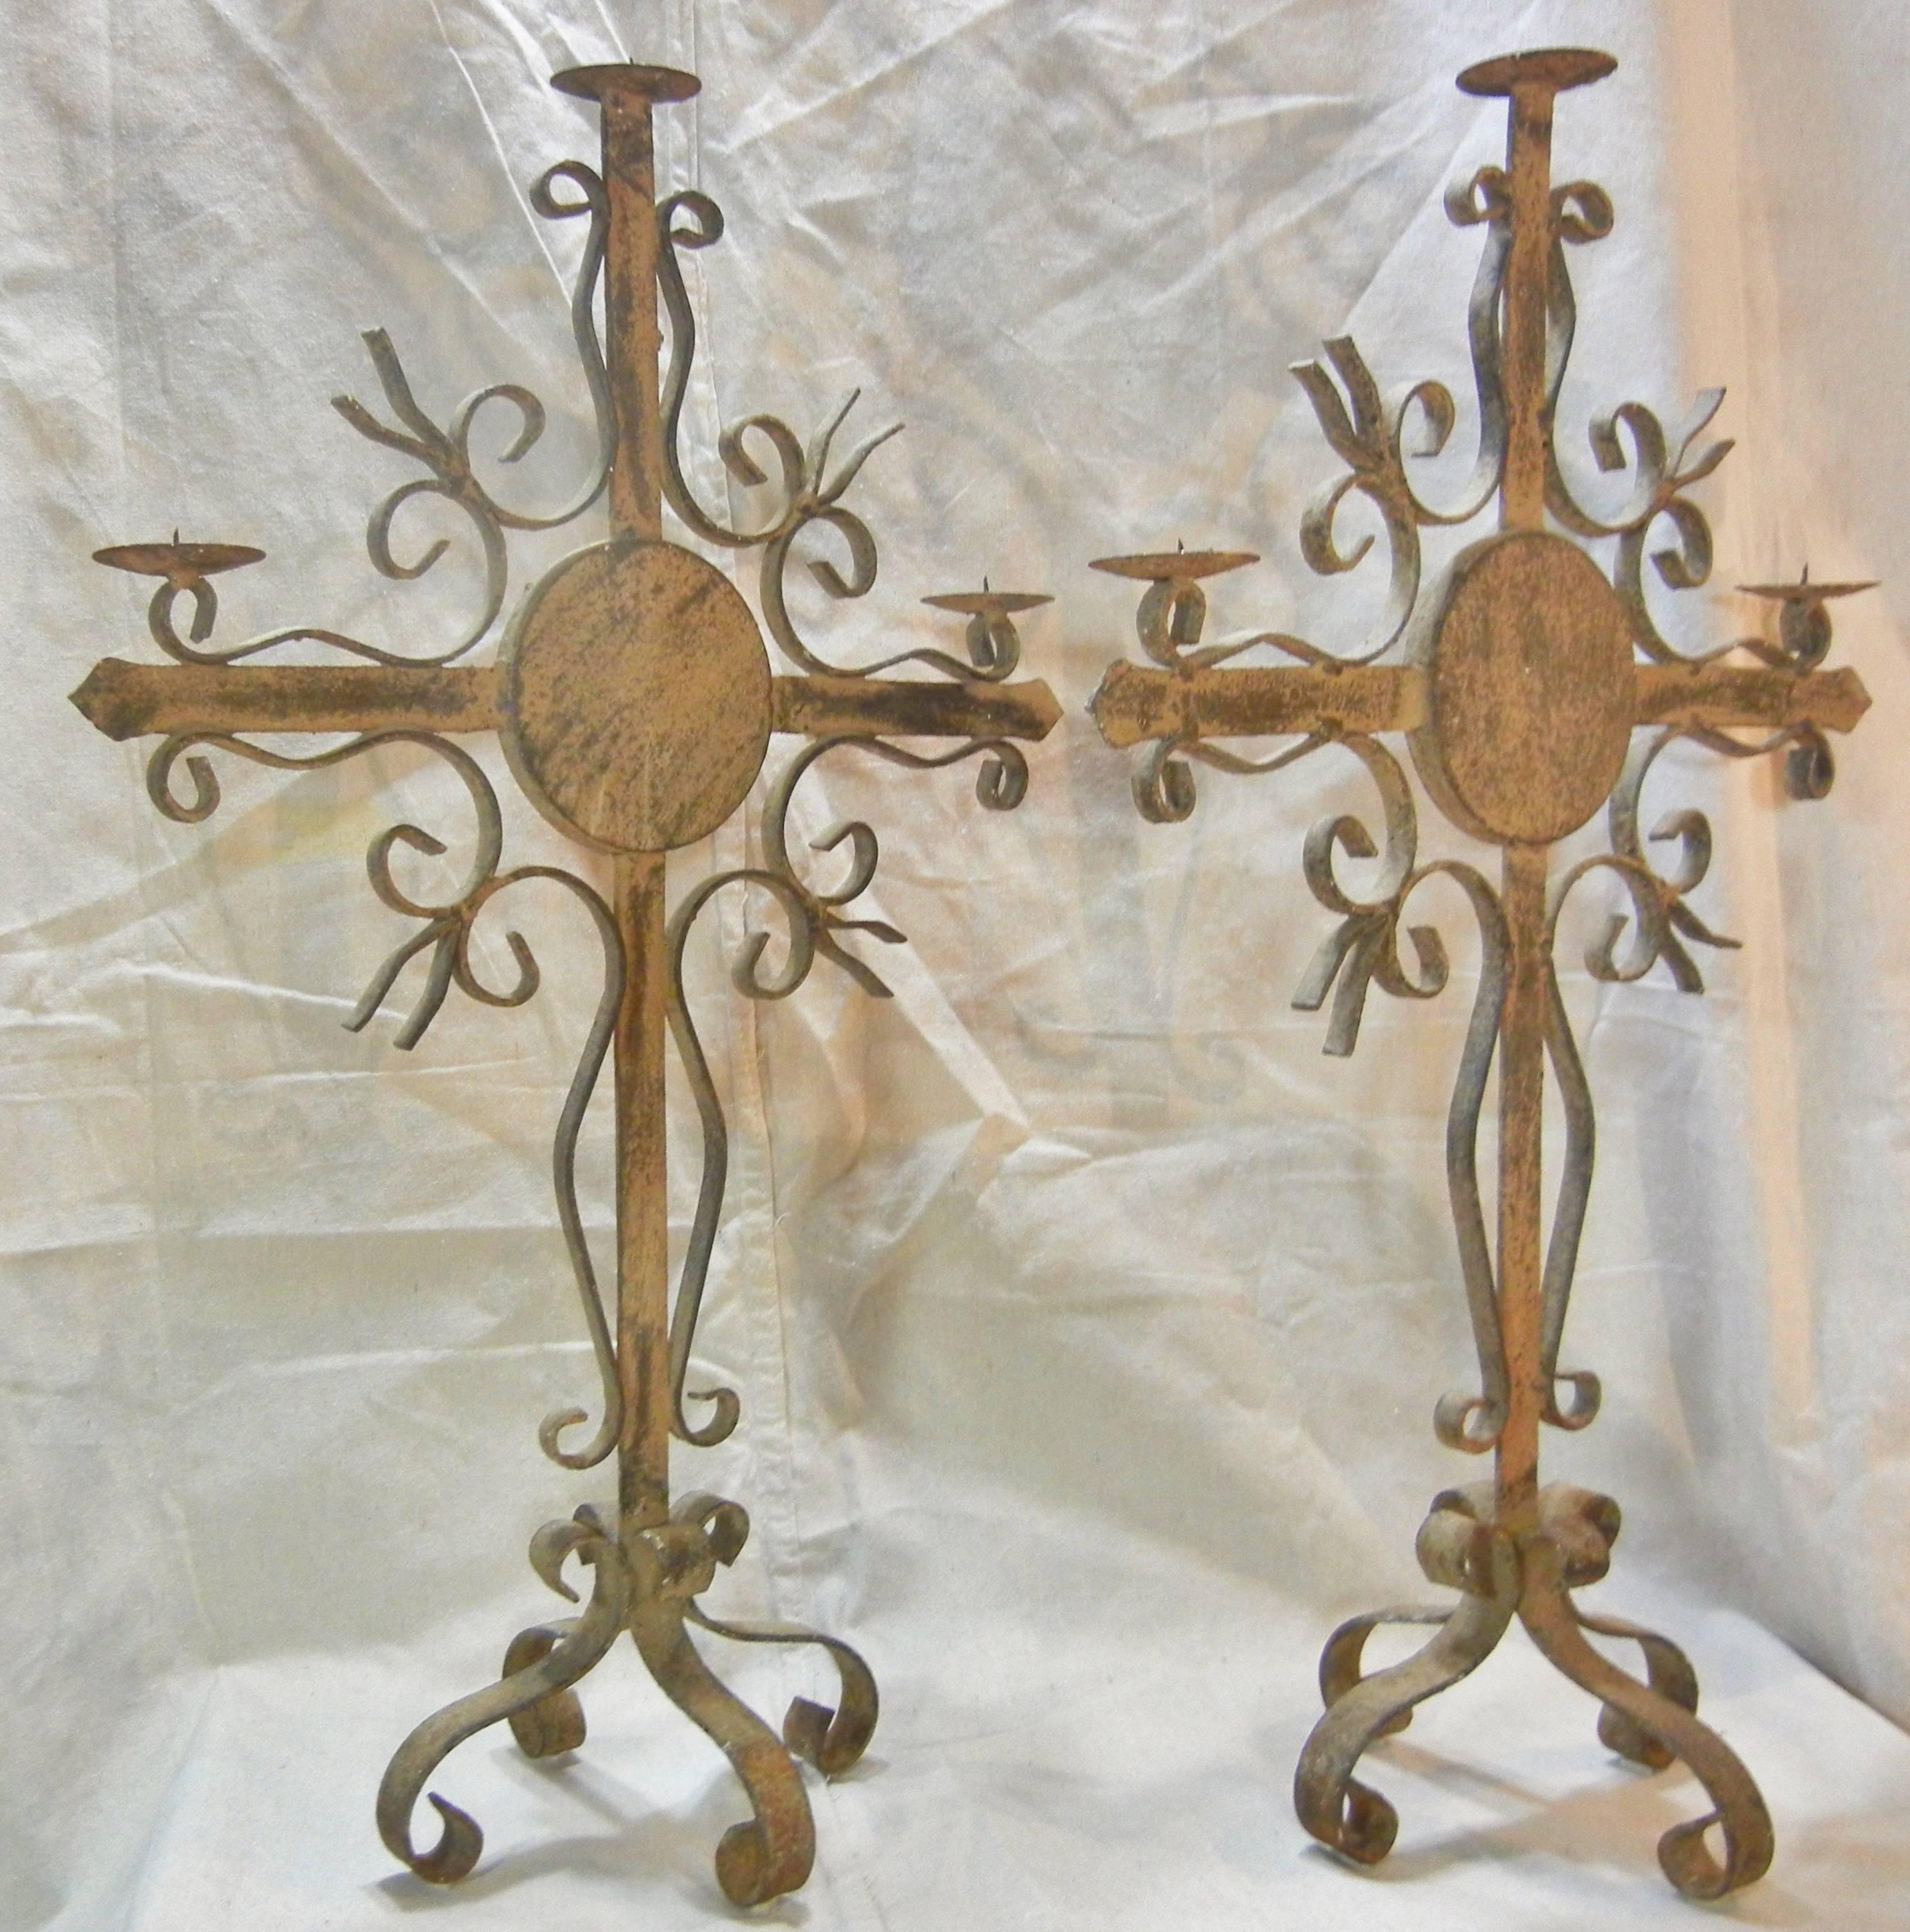 Canadian Pair of Gothic Revival Wrought Iron Candelabra, Weathered Patina, Quebec, 1880